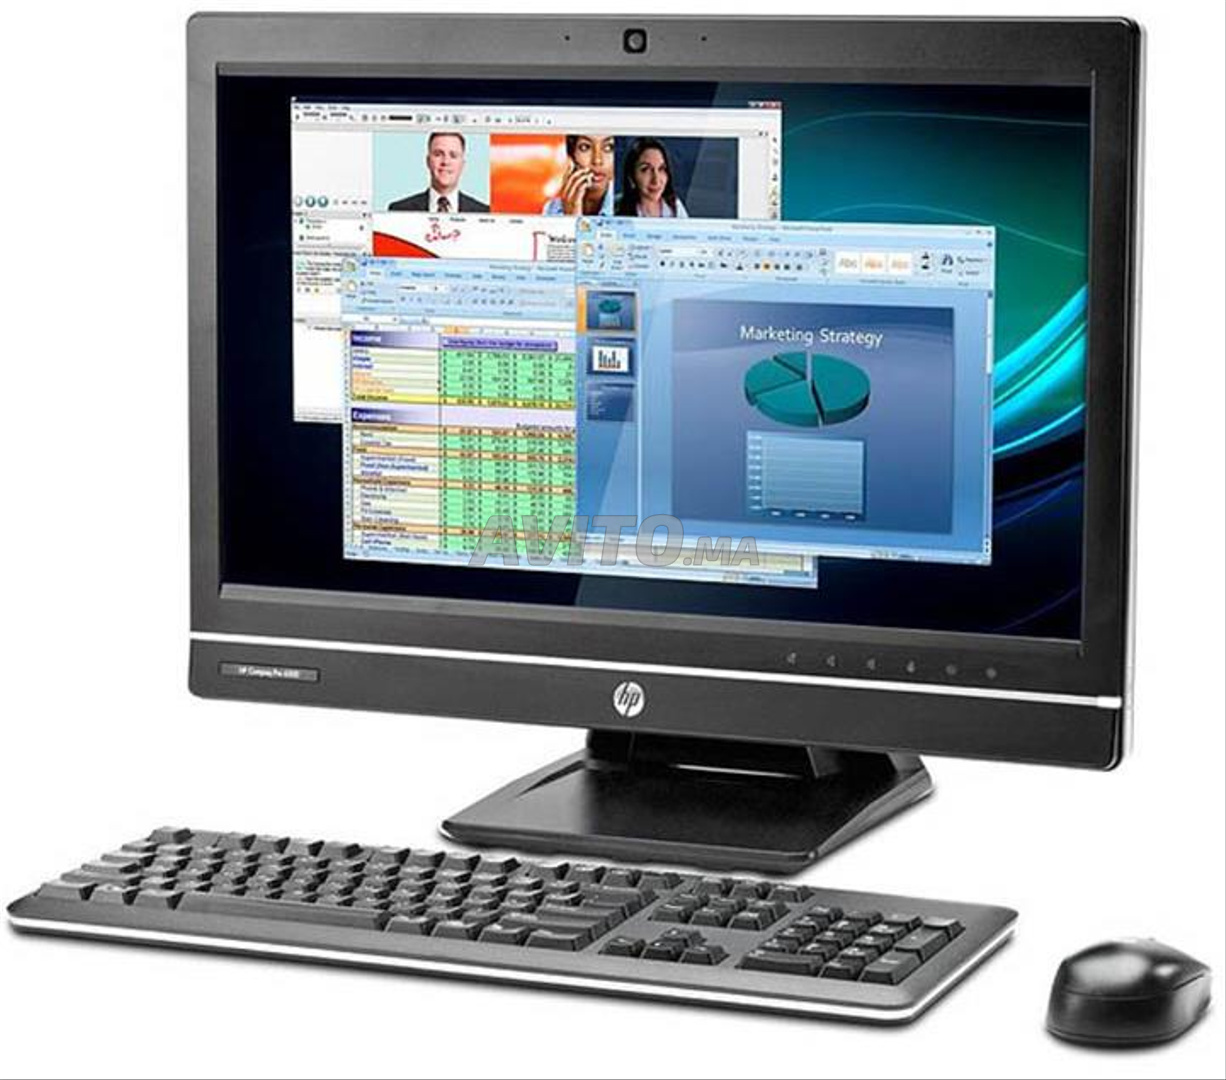 A NE PAS RATER PC HP AIO 8300  A BENMSIK - 1